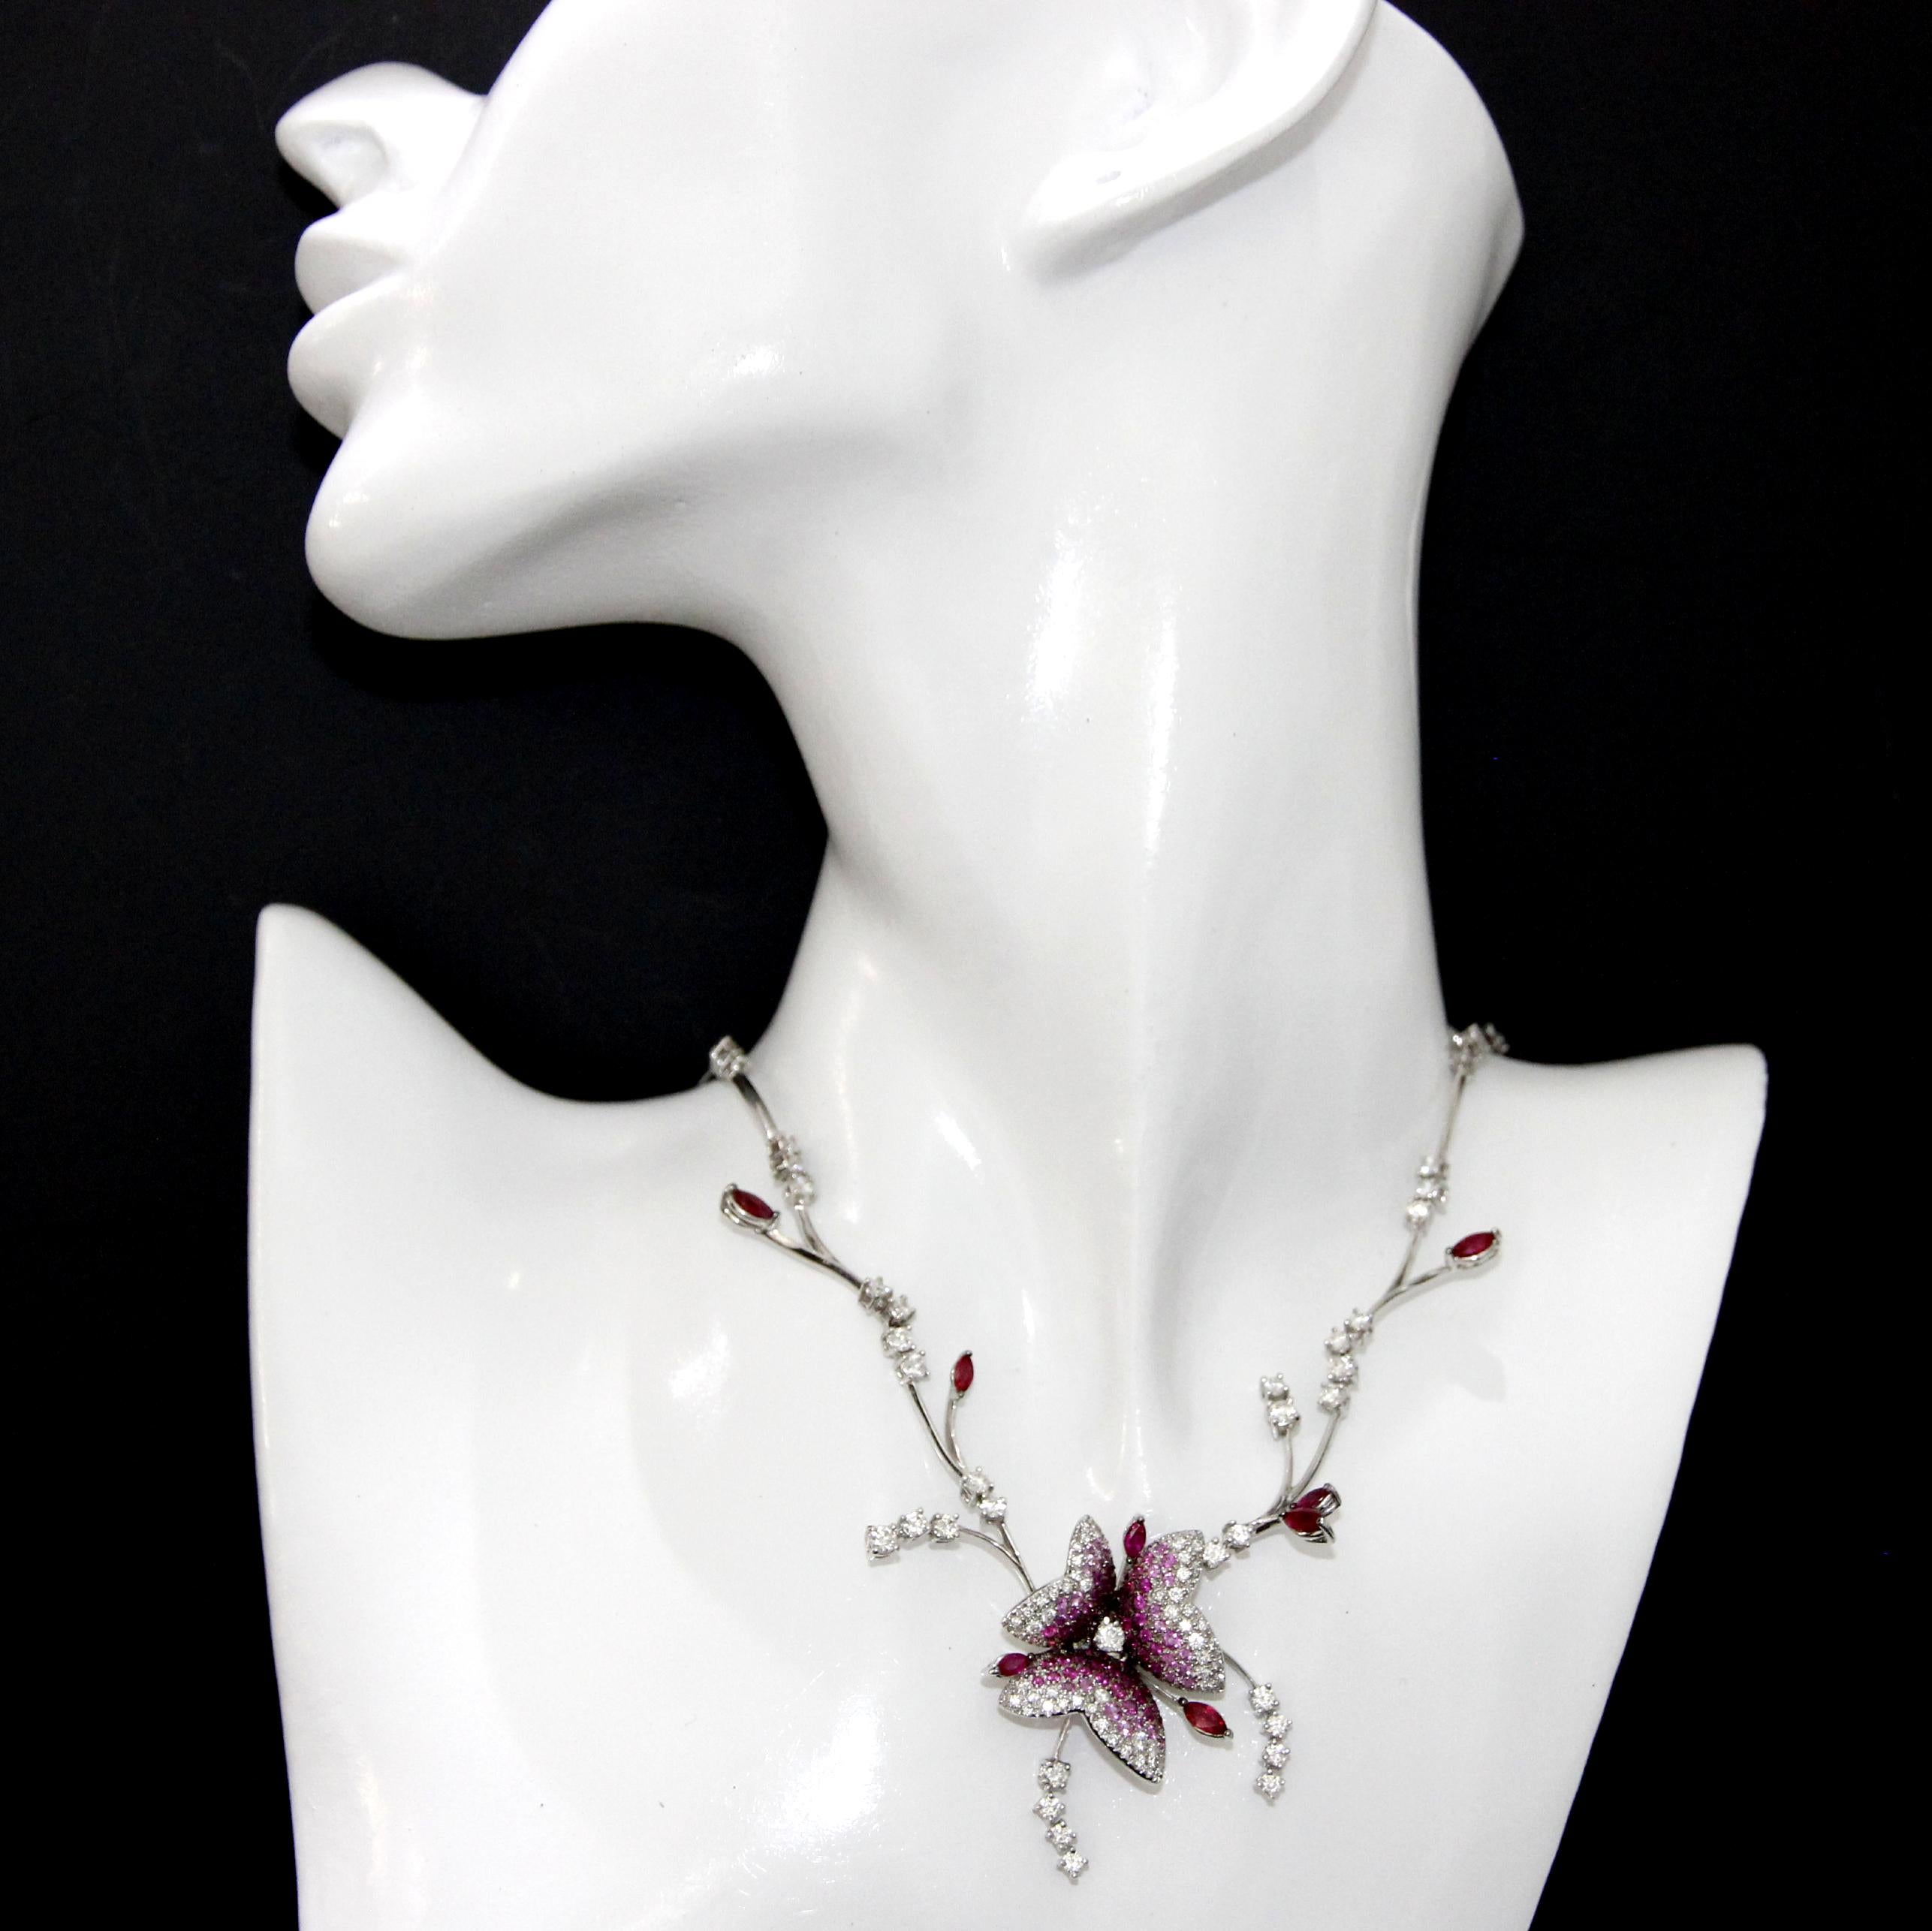 Stefan Hafner 18k White Gold Diamonds, Ruby and Pink Sapphires Flower Necklace.
Diamonds 4.73ctw
Pink Sapphires 1.33ctw
Ruby 2.3ctw
Length 14